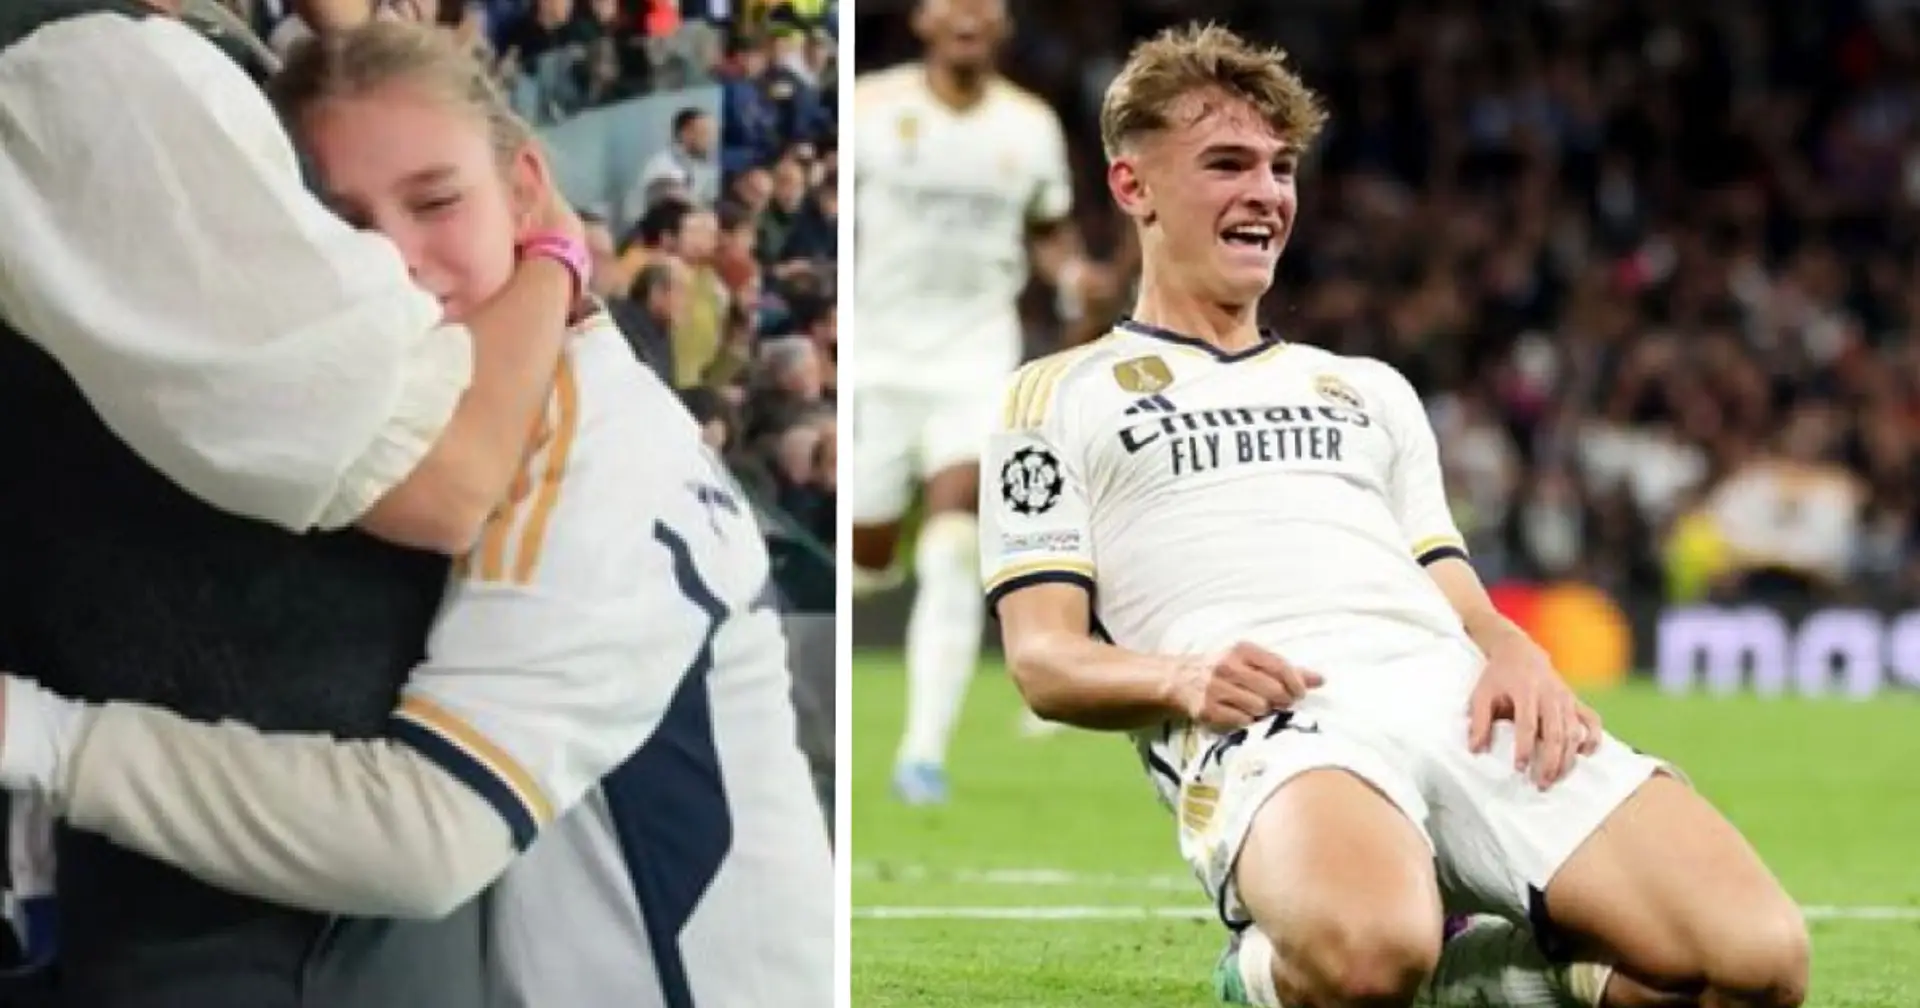 Spotted: Nico Paz family in tears as he scores first Real Madrid goal